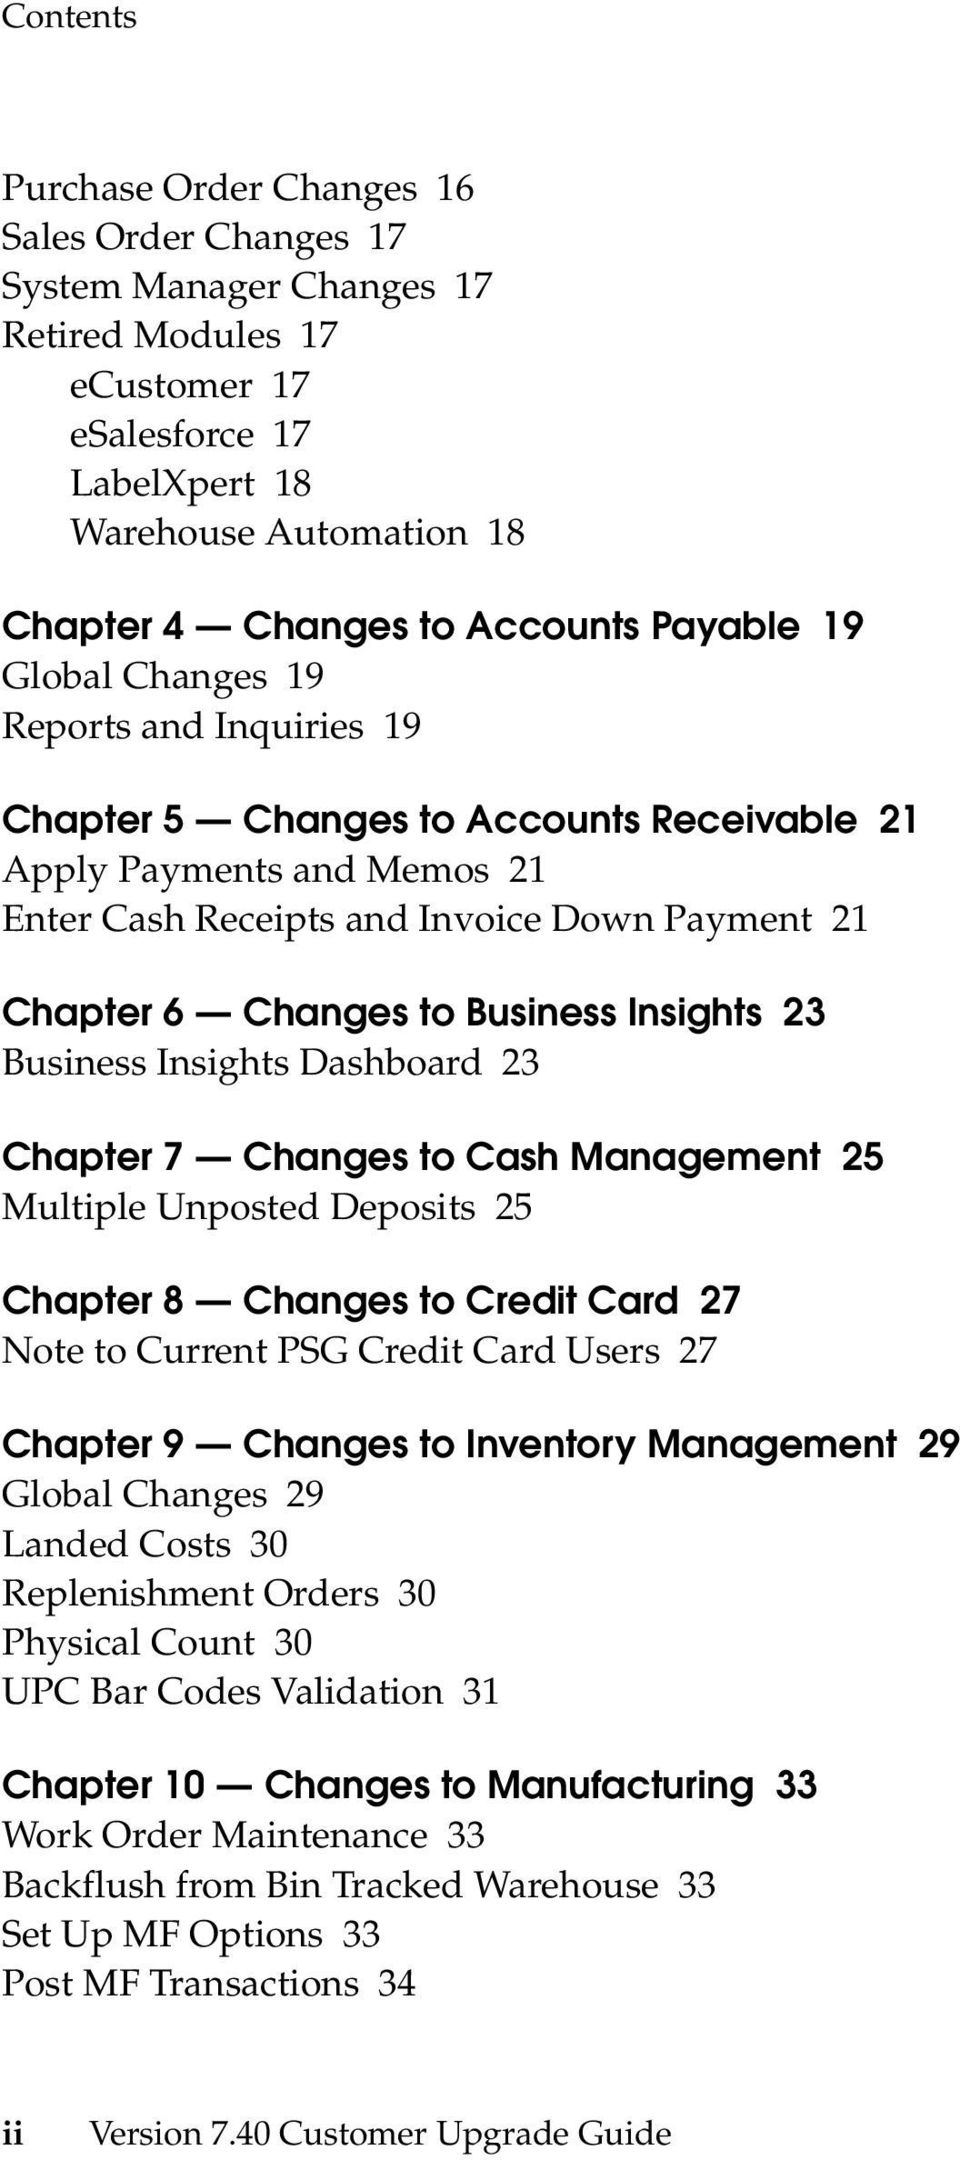 Business Insights 23 Business Insights Dashboard 23 Chapter 7 Changes to Cash Management 25 Multiple Unposted Deposits 25 Chapter 8 Changes to Credit Card 27 Note to Current PSG Credit Card Users 27